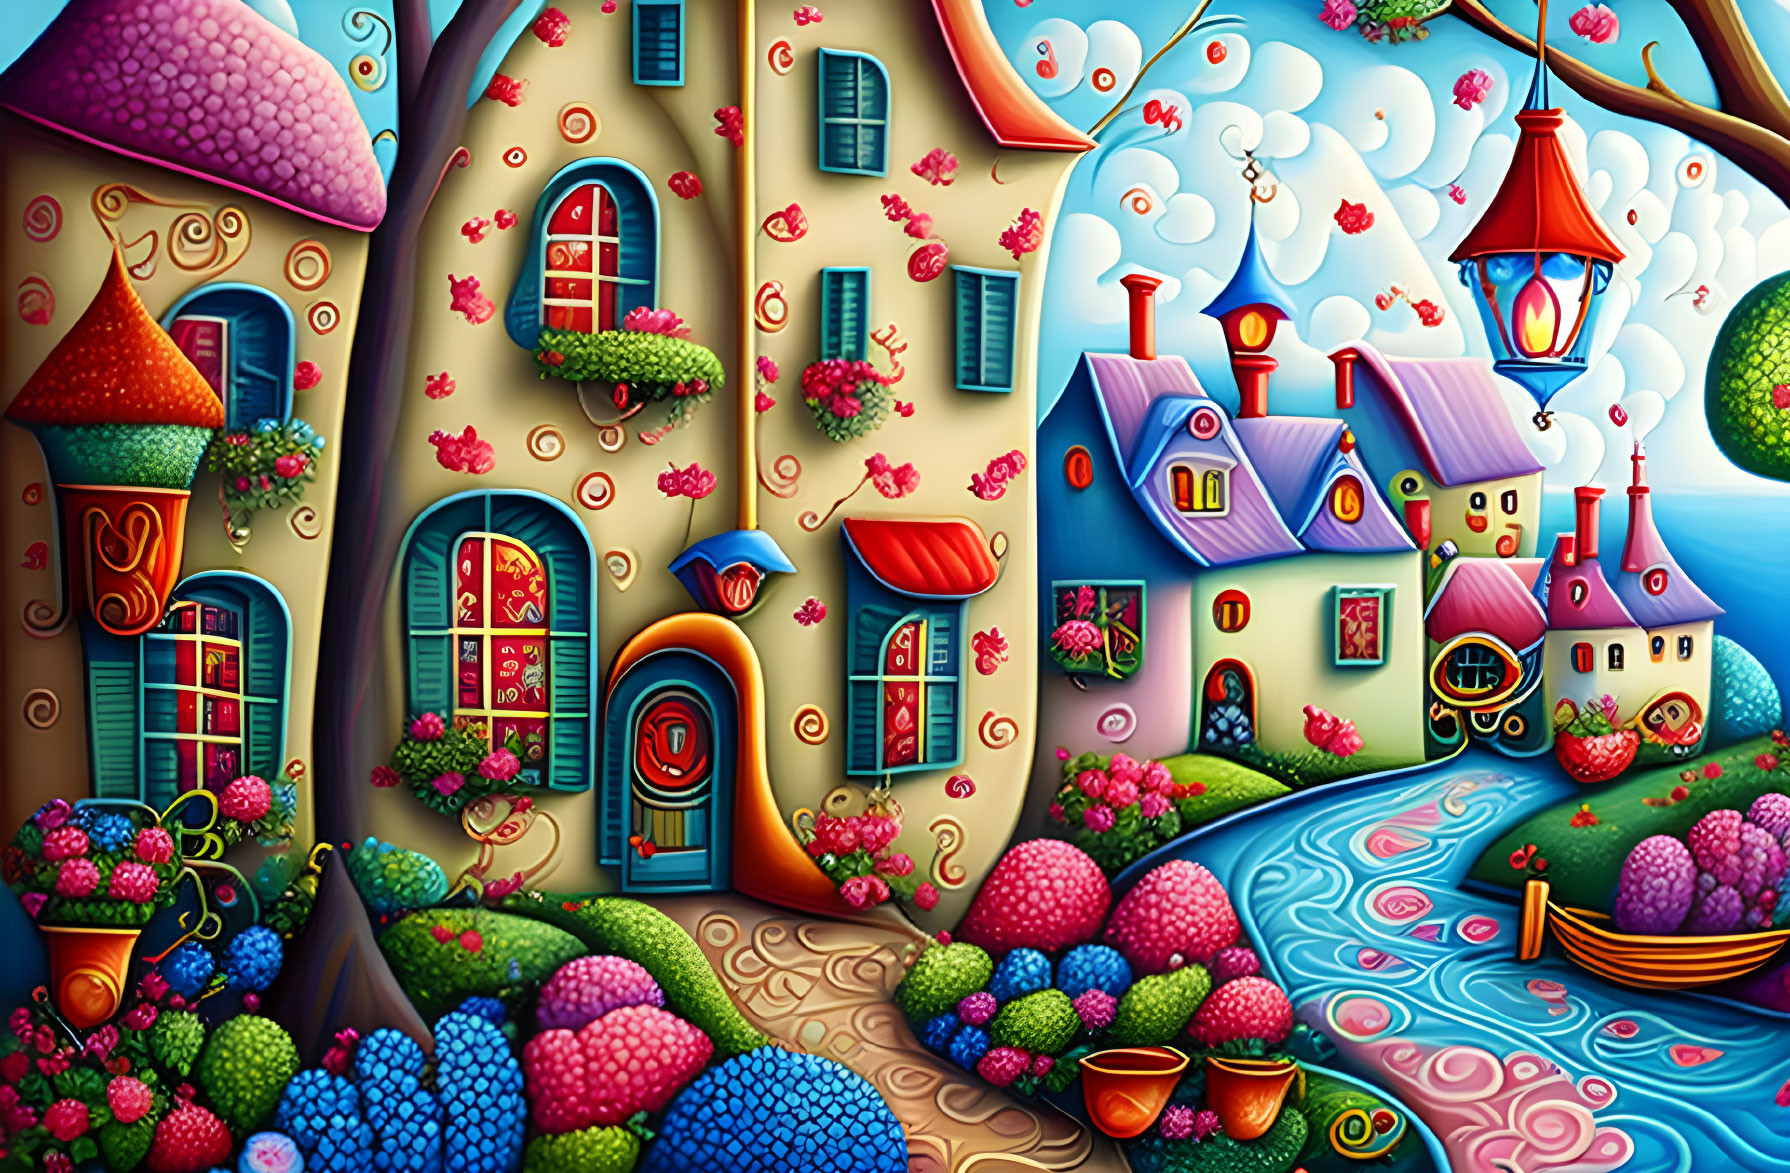 Colorful Fairytale Landscape with Stylized Houses and River